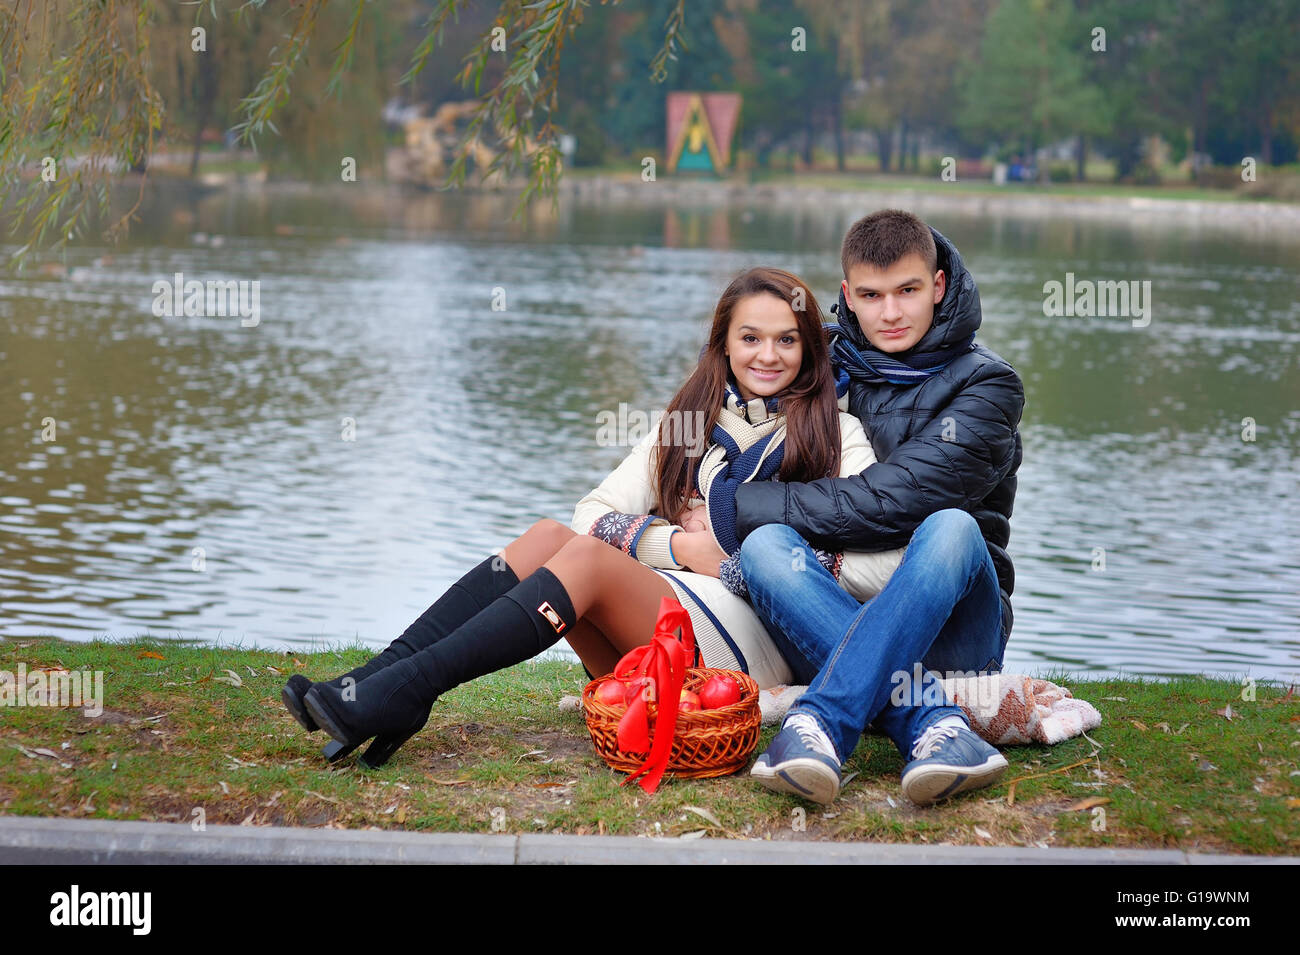 Boy and girl in park on a background of water with apples Stock Photo